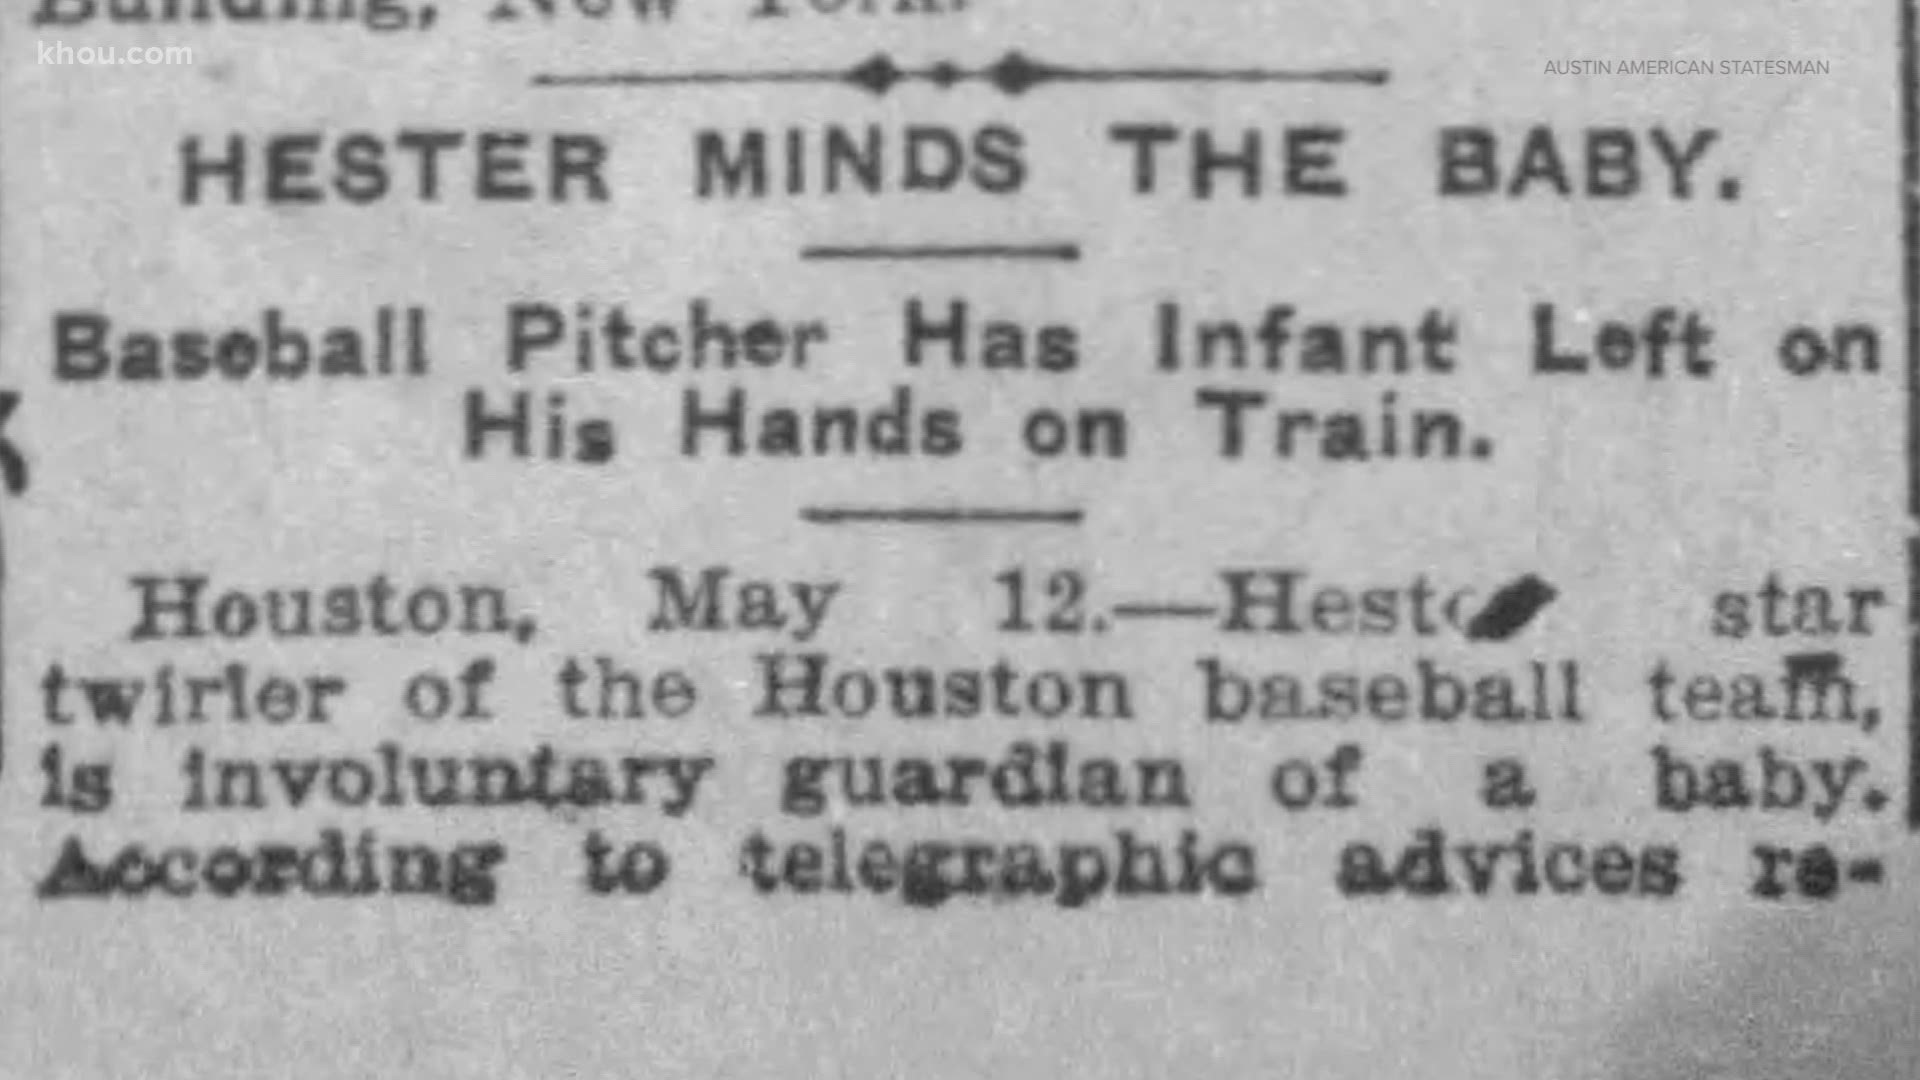 A woman left the child with Houston pitcher W.E. Hester and the rest is history.